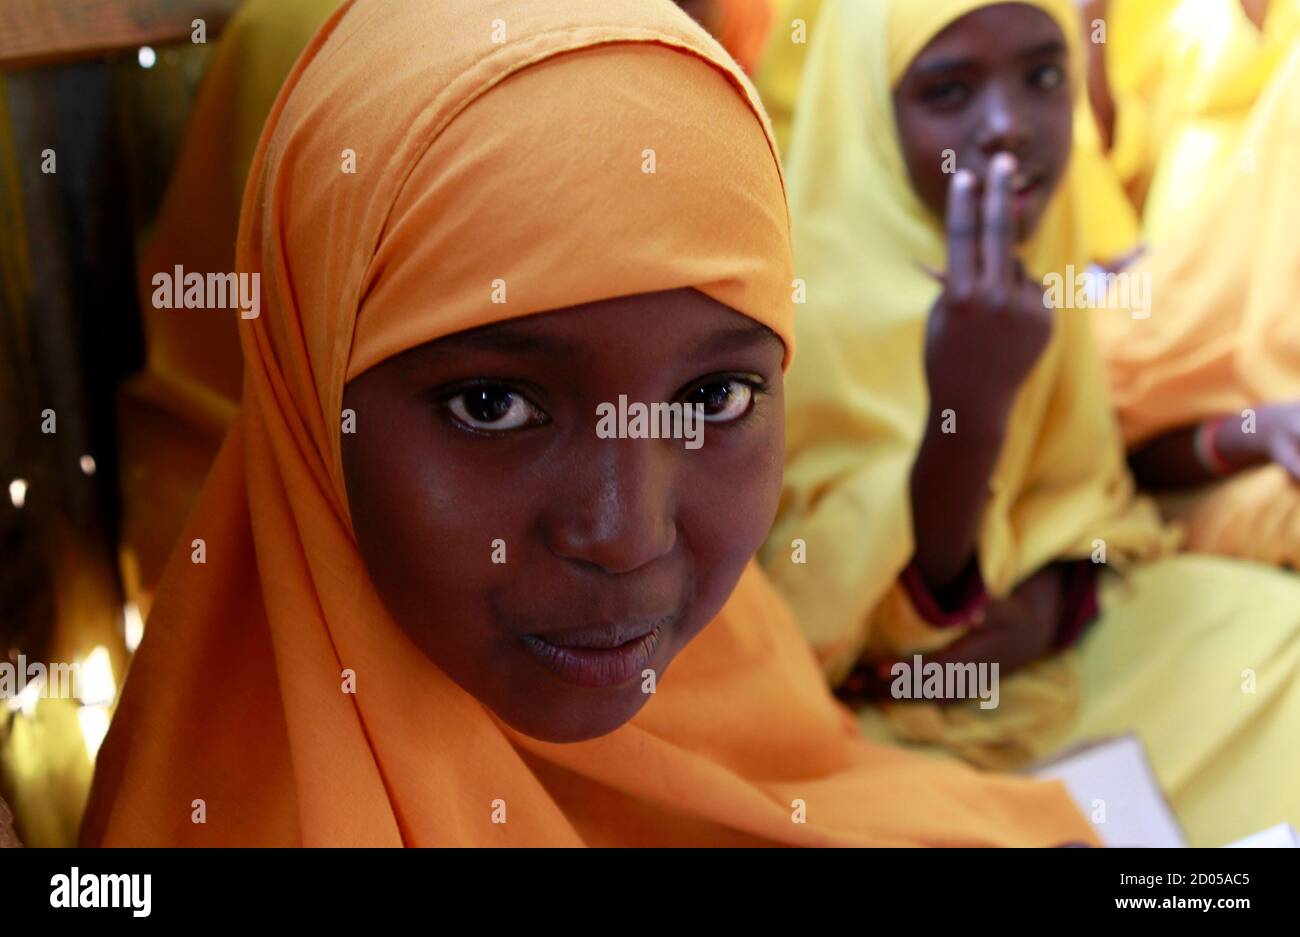 A Somali refugee girl attends Koran classes at the Liban integrated academy at the Ifo refugee camp in Dadaab, near the Kenya-Somalia border, August 2, 2011. The Horn of Africa food crisis shows the need to provide the world's poor with better access to family planning as part of efforts to prevent future tragedies, the head of the United Nations Population Fund (UNFPA) said. REUTERS/Thomas Mukoya (KENYA - Tags: SOCIETY CIVIL UNREST DISASTER ENVIRONMENT RELIGION) Stock Photo